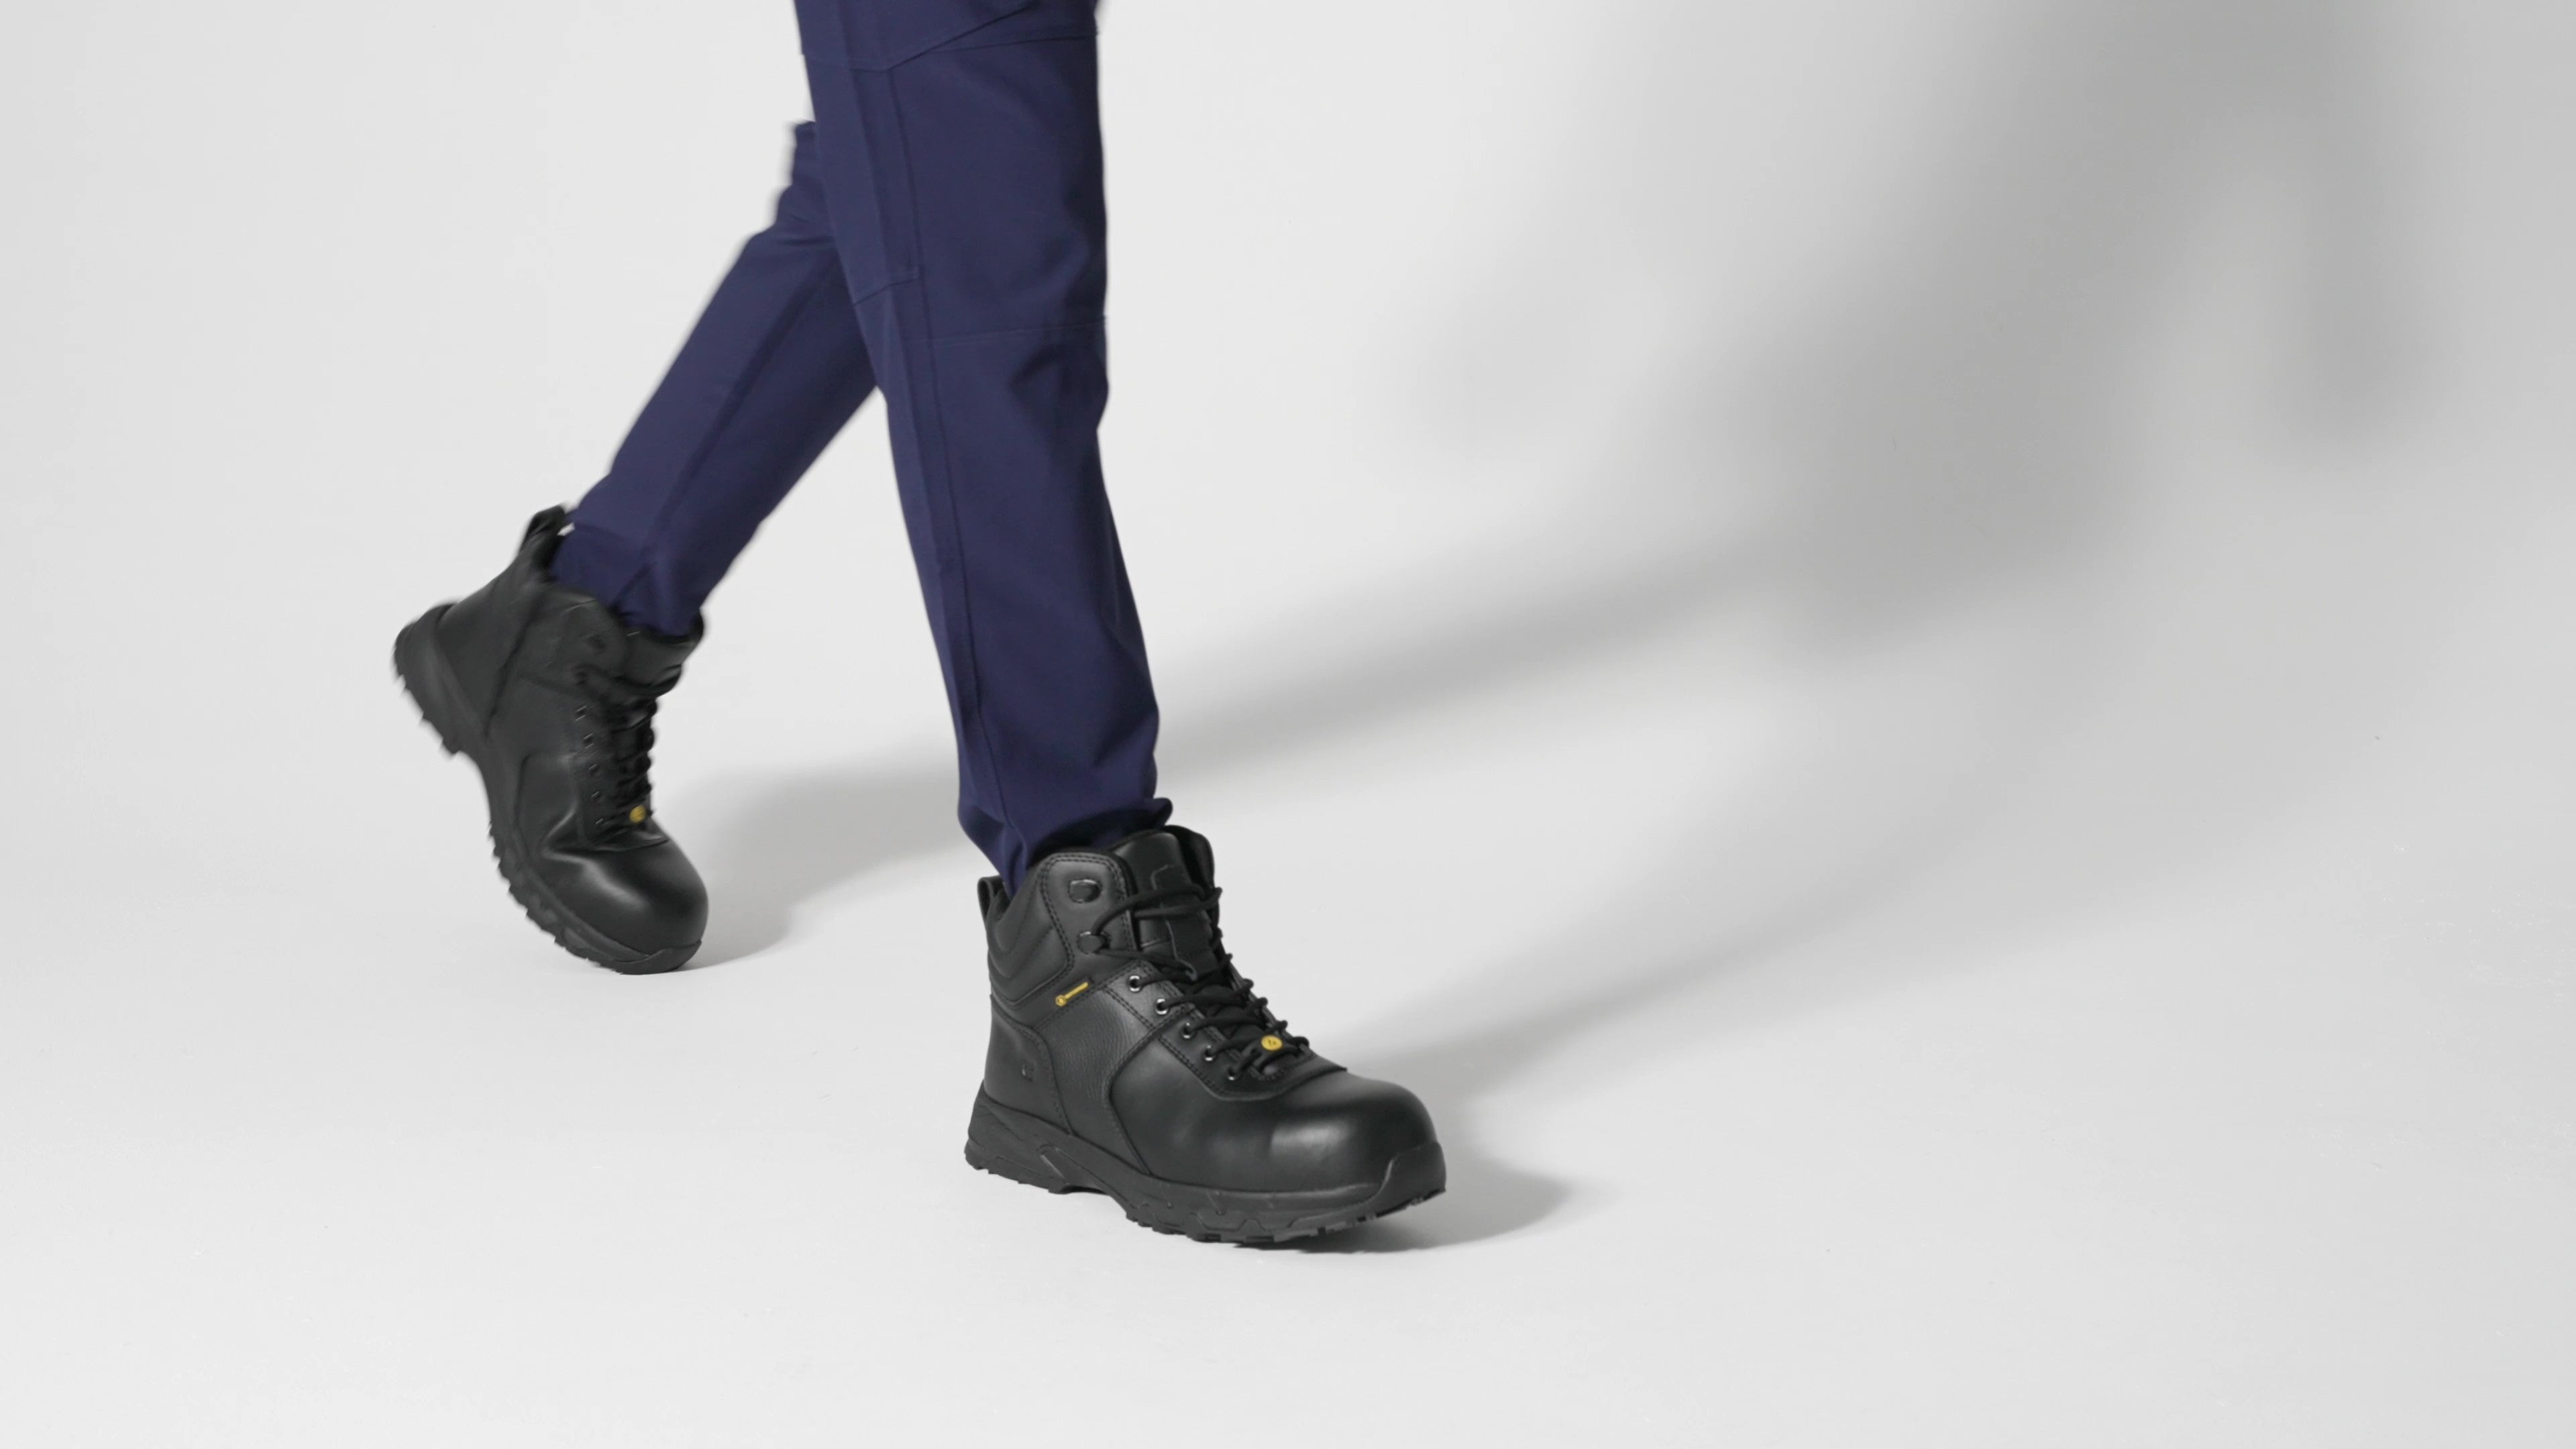 The Guard Mid from Shoes For Crews are waterproof slip-resistant safety boots with a safety toe cap, product video.